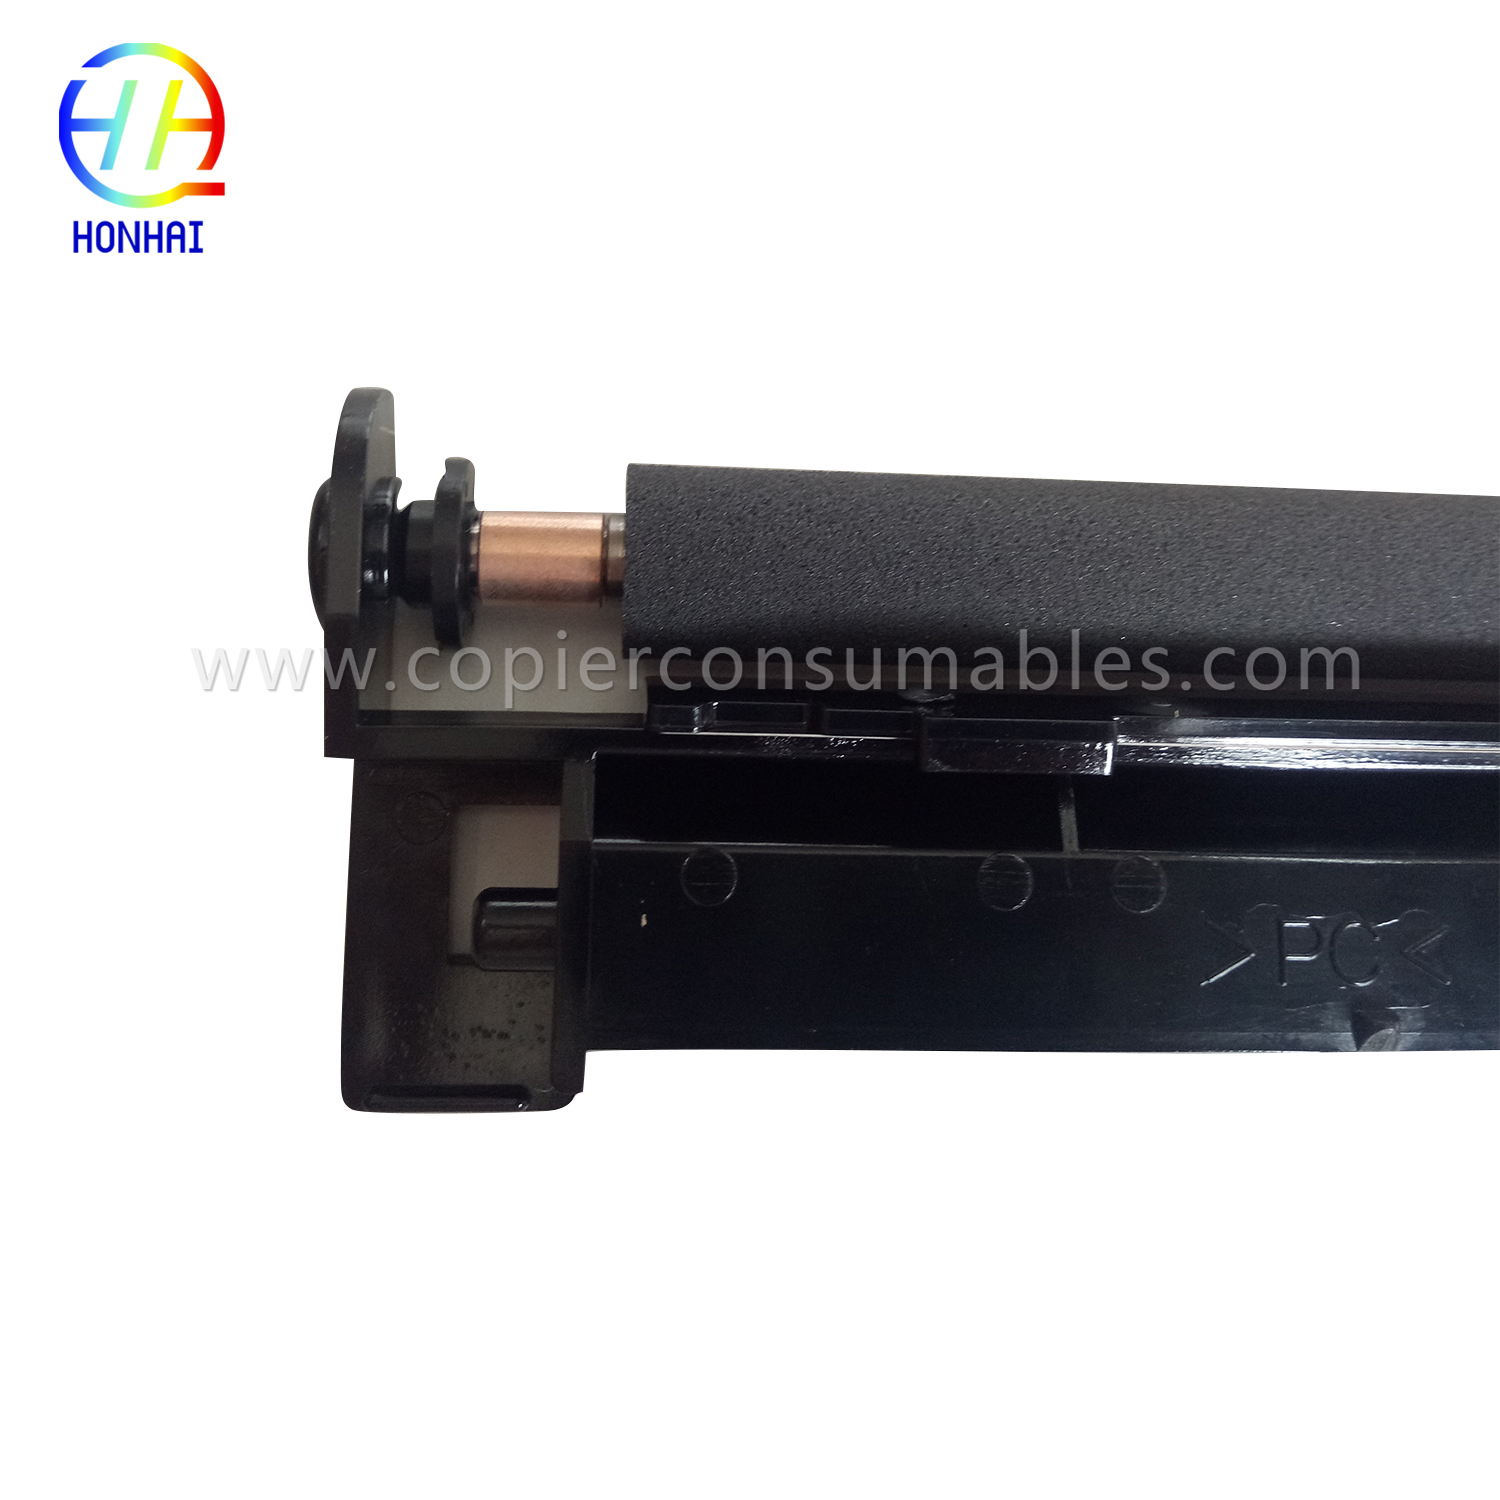 Transfer Roller Assembly for Ricoh Aficio 1022 1027 2022 2027 220 270 3025 3030 MP2510 2550 2852 (B2093831) (3)